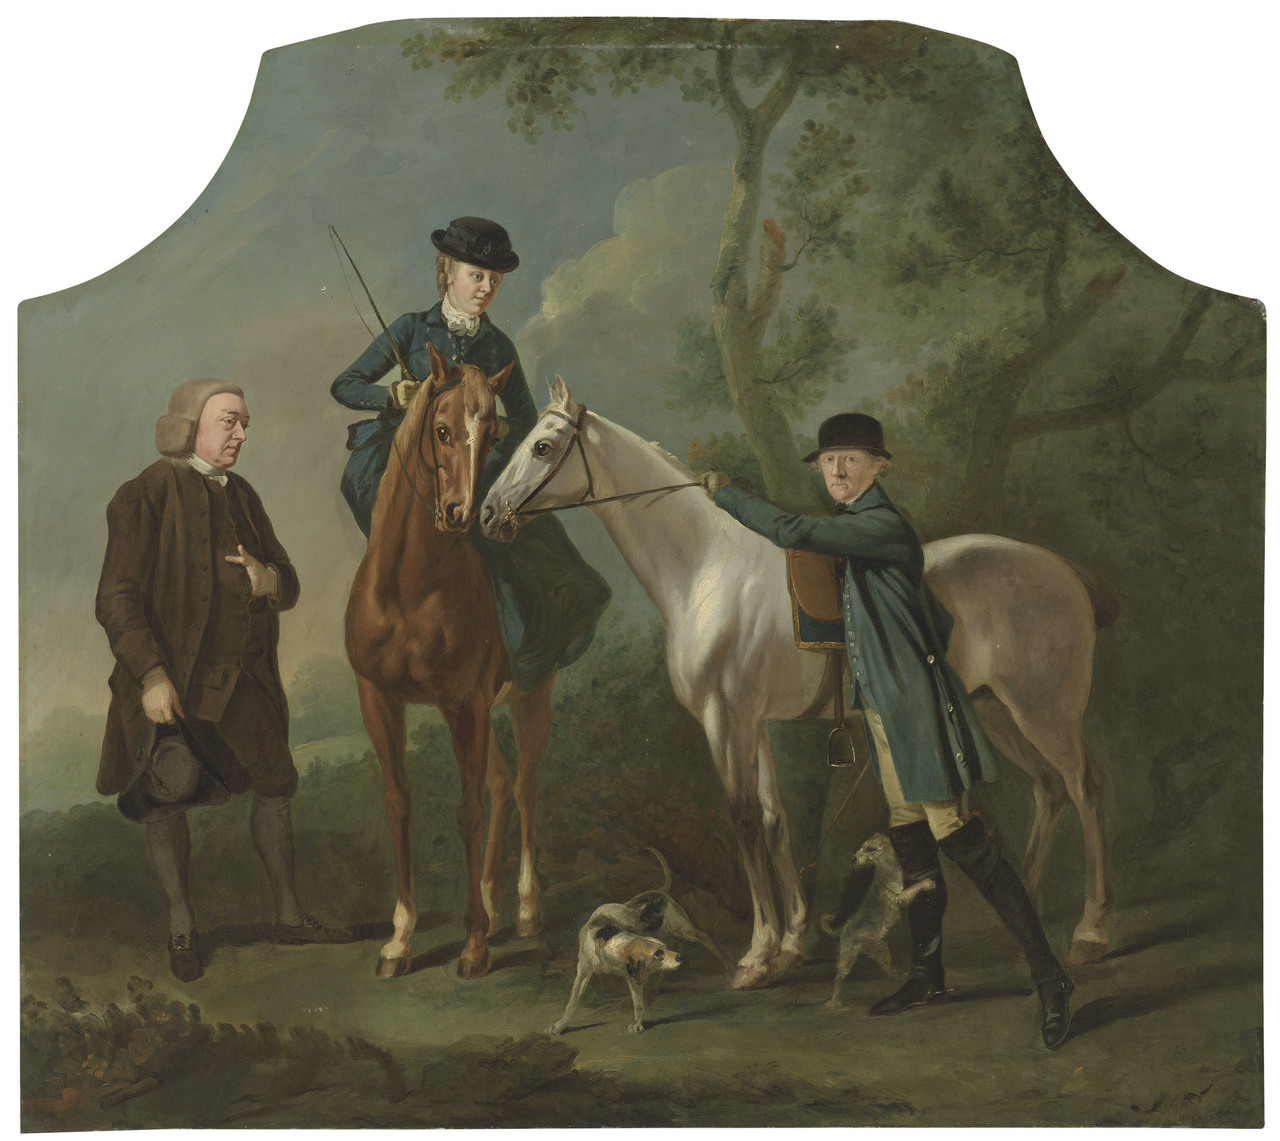 English School (formerly attributed to â€˜Benjamin Wilsonâ€™), 'A Lady and a Gentleman preparing for the huntâ€™, c.1780, oil on canvas, English, for sale est. 7,000-10,000 GBP in Christieâ€™s Old Masters Day sale, July 2019